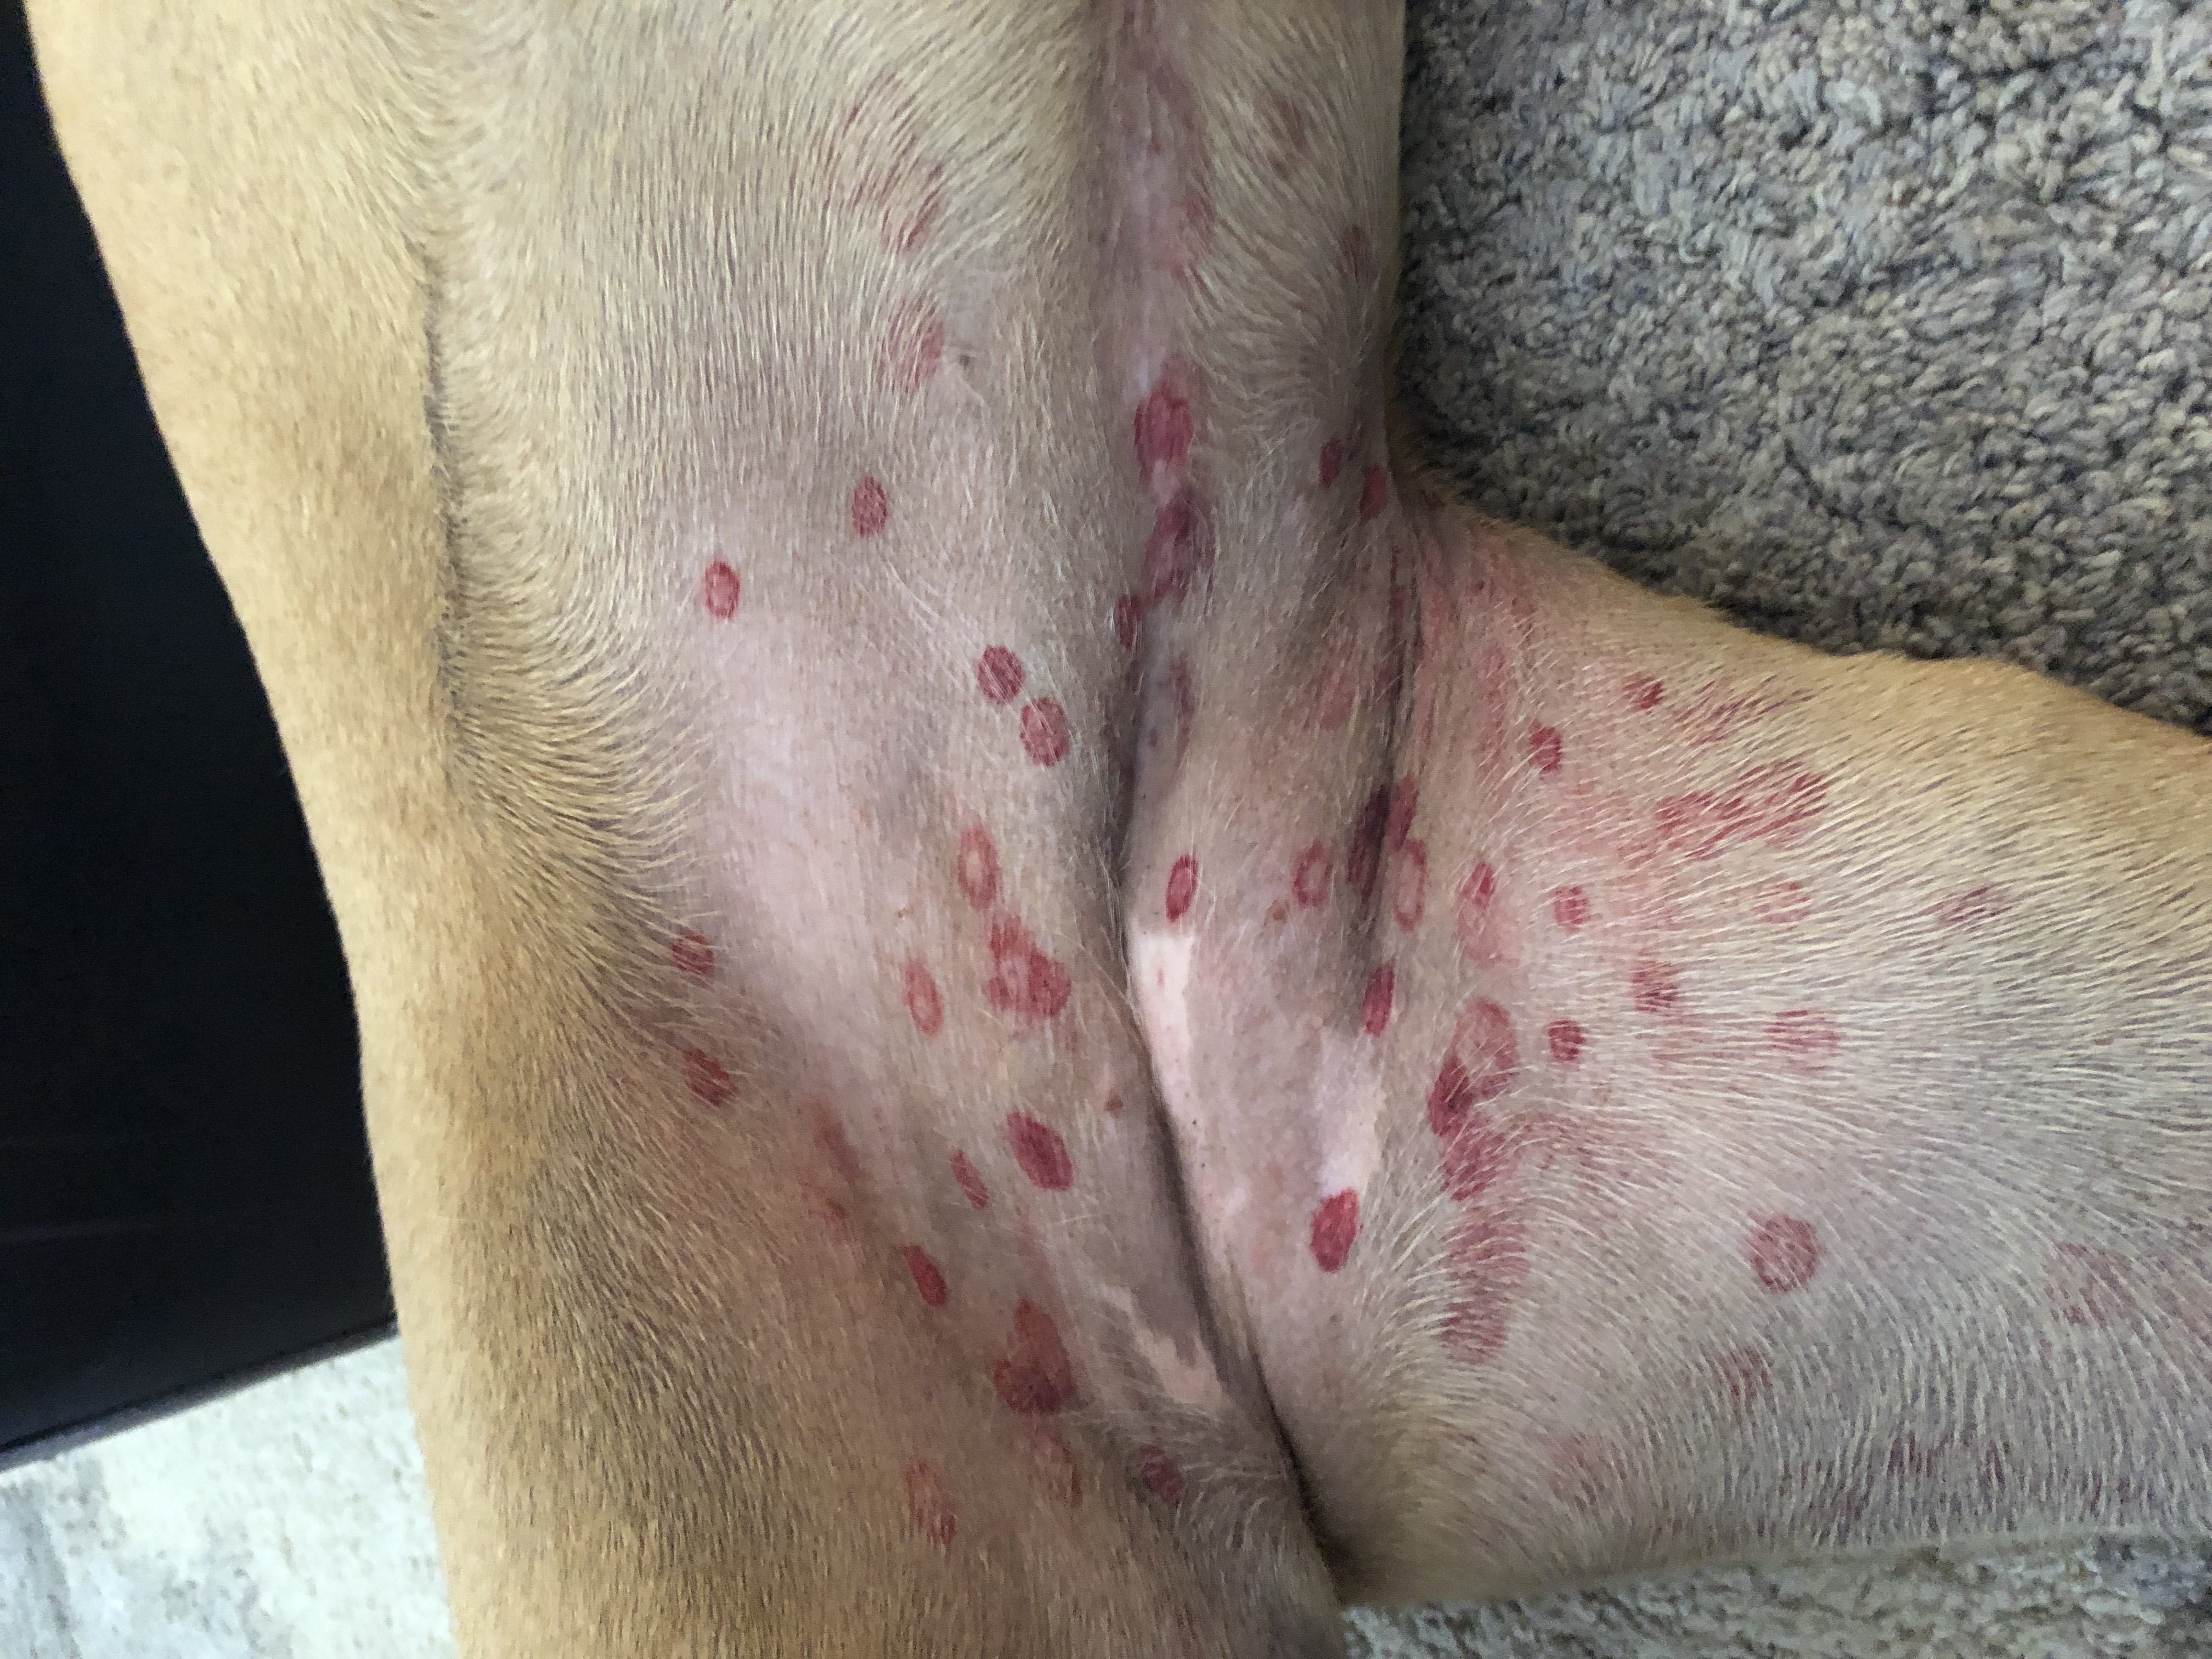 what do gnat bites look like on a dog